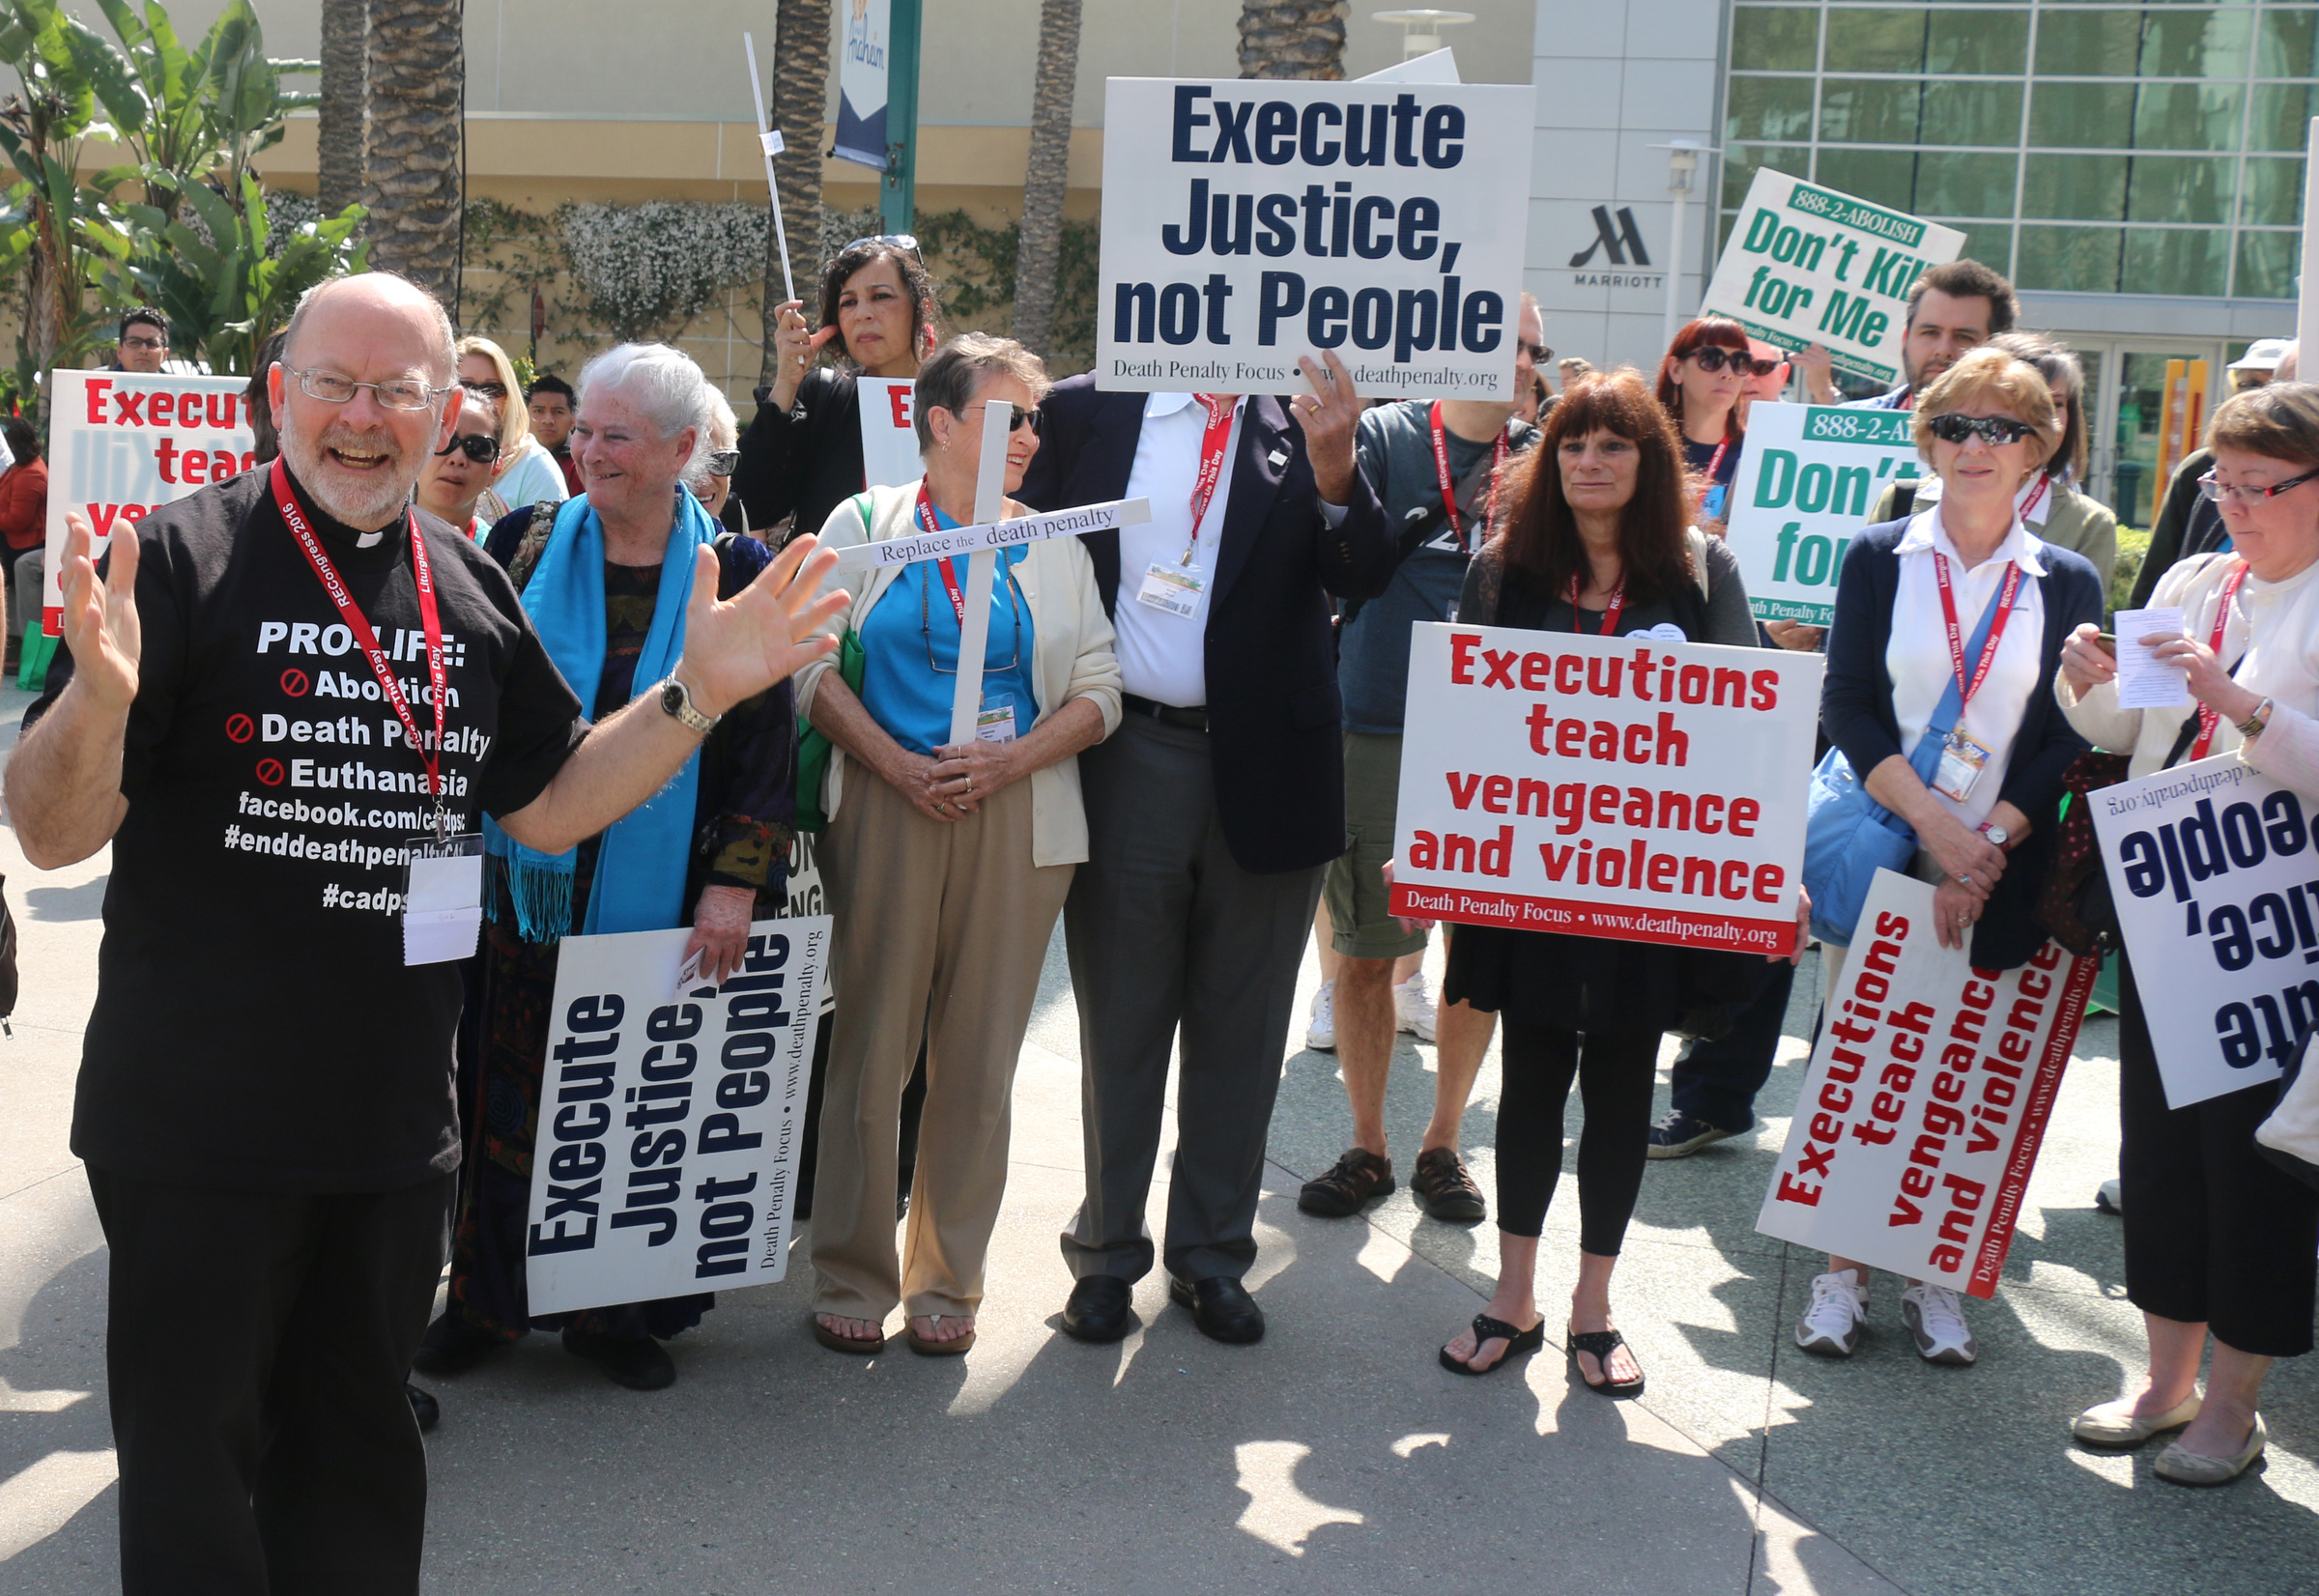 An unidentified priest leads a demonstration against the death penalty Feb. 27 as part of the Los Angeles Religious Education Congress in Anaheim, Calif. (CNS/The Tidings/J.D. Long-Garcia)